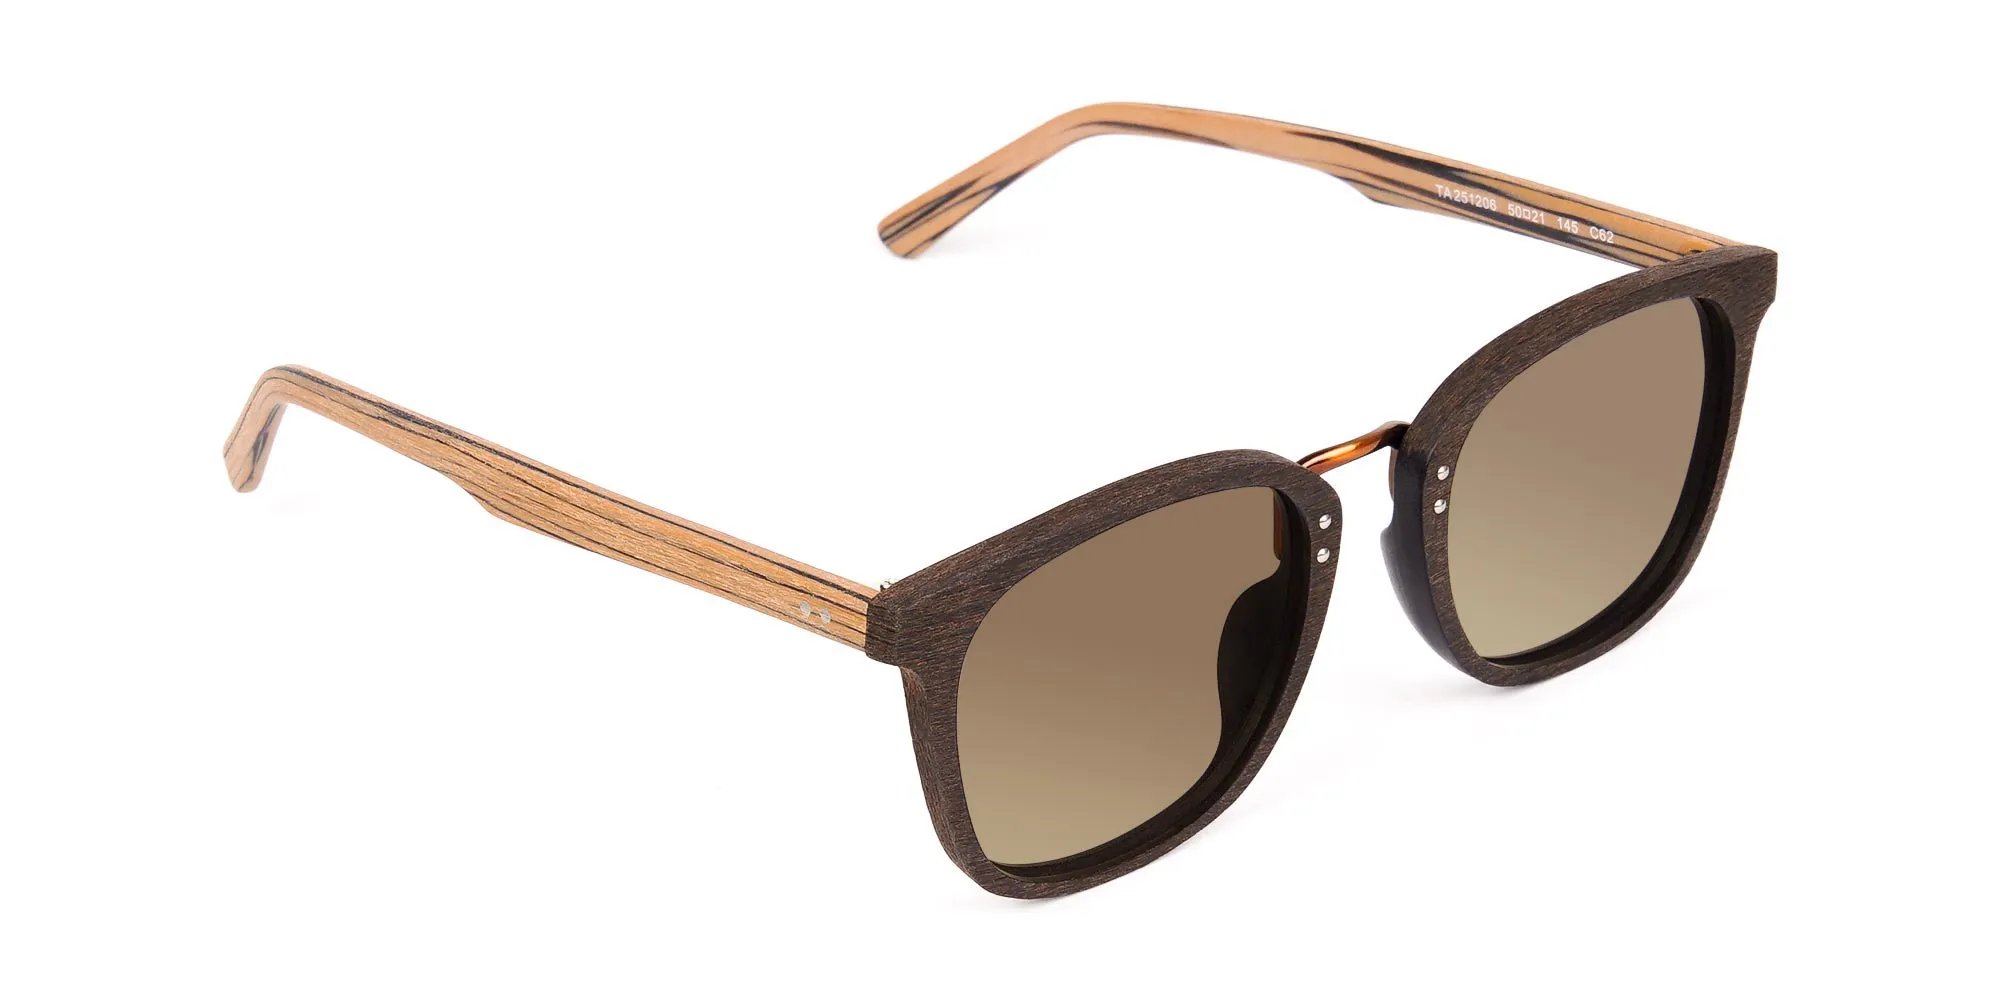 Wooden-Brown-Square-Sunglasses-with-Brown-Tint-2